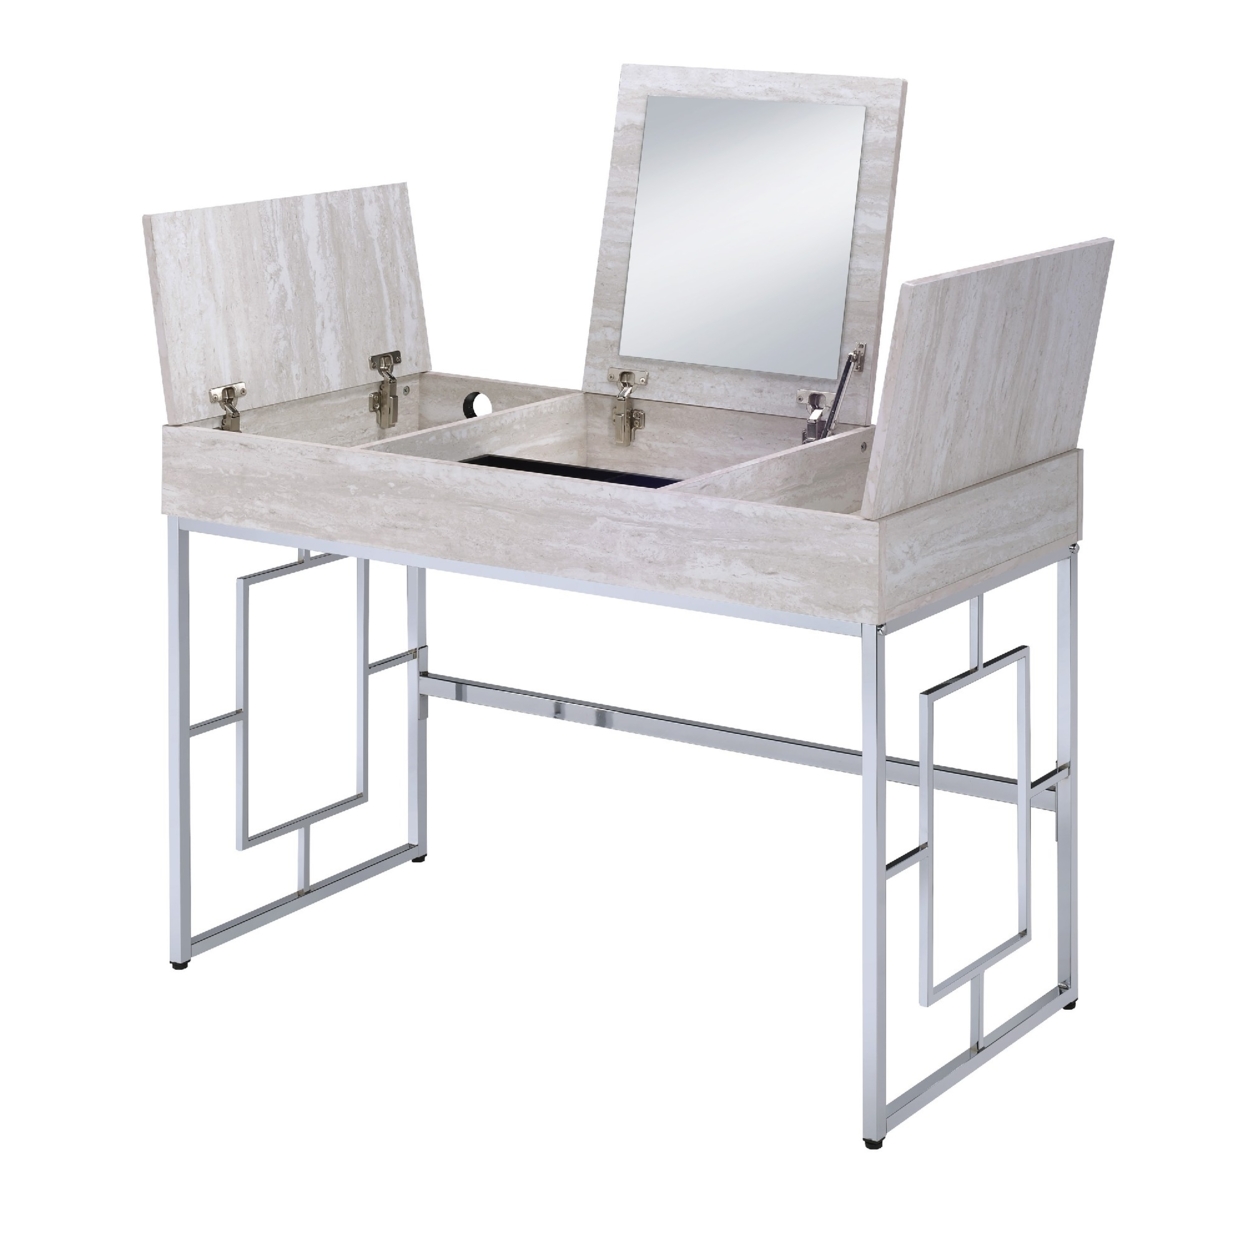 Wood And Metal Vanity Desk With Lift Top Compartments,Silver And Brown- Saltoro Sherpi